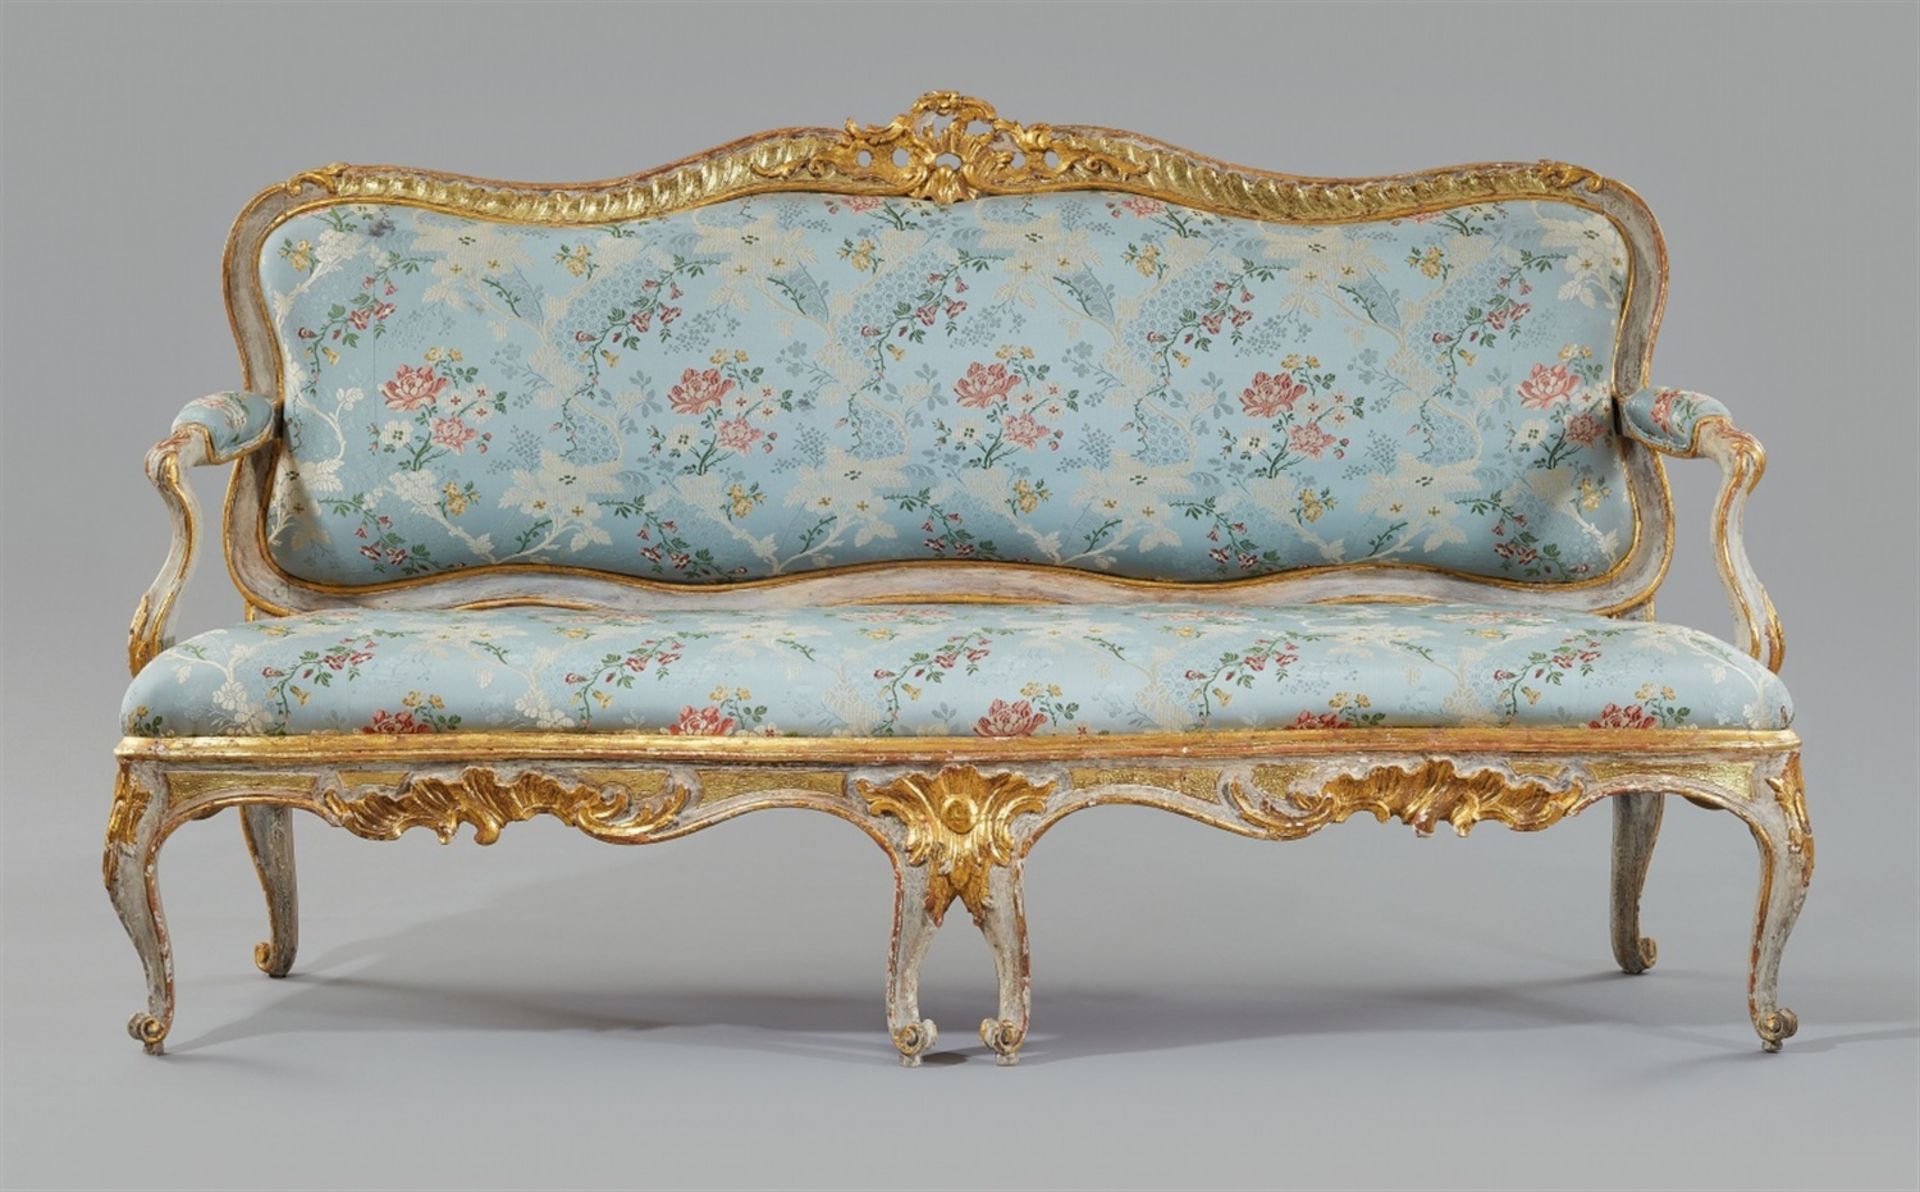 A Rococo canapéWhite and gilt softwood, replaced silk covers over upholstery. Designed to be